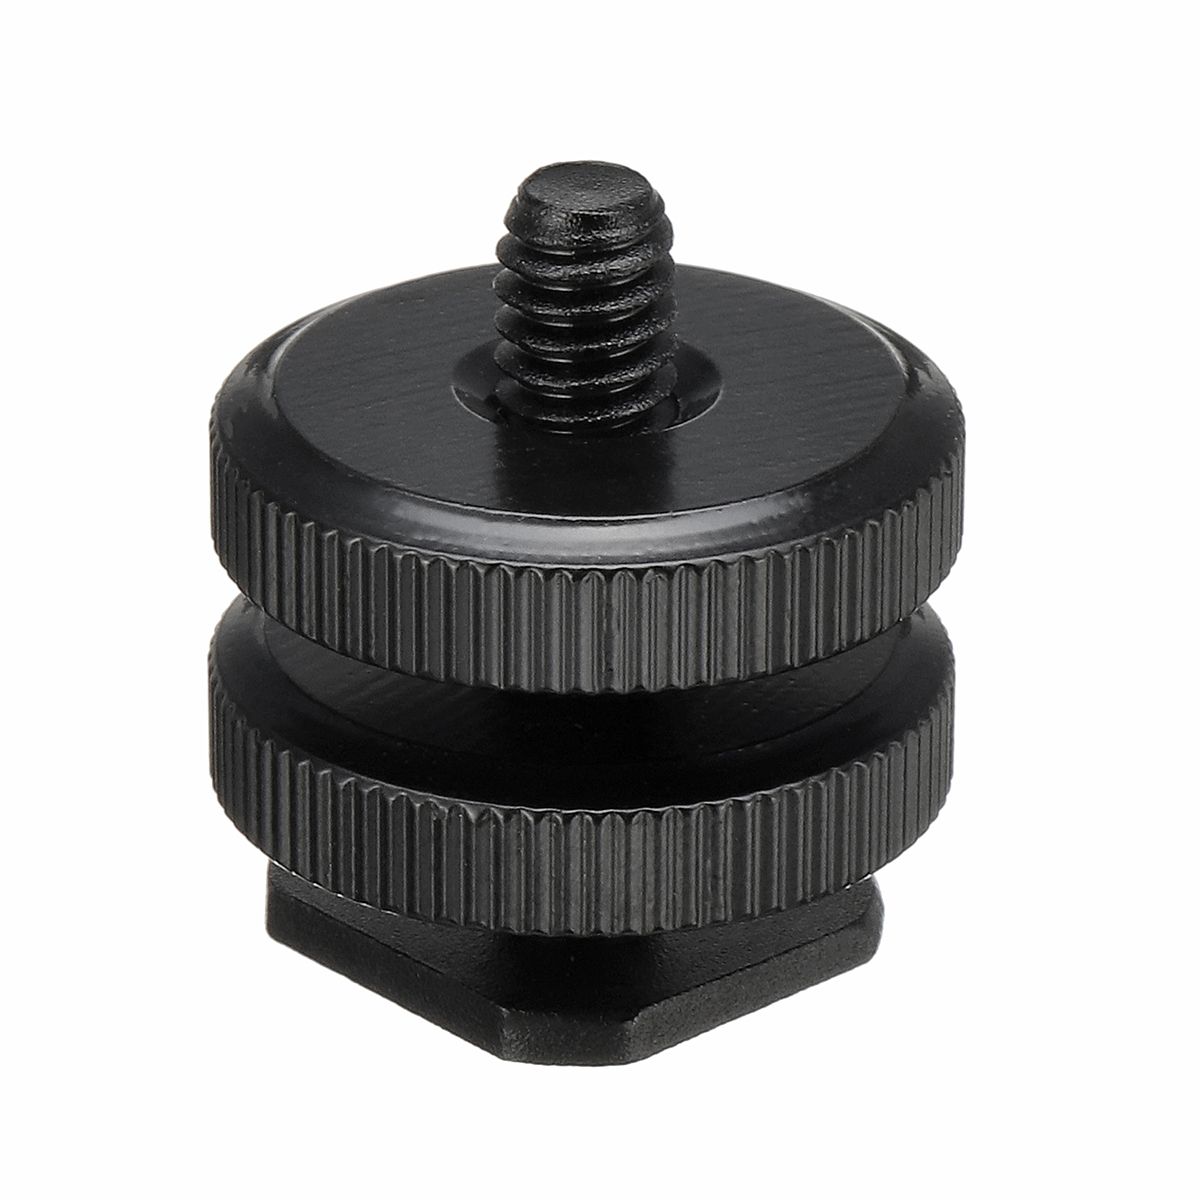 14-Inch-Dual-Thumb-Screw-Flash-Cold-Hot-Shoe-Camera-Adapter-Mount-for-GoPro-DSLR-1426183